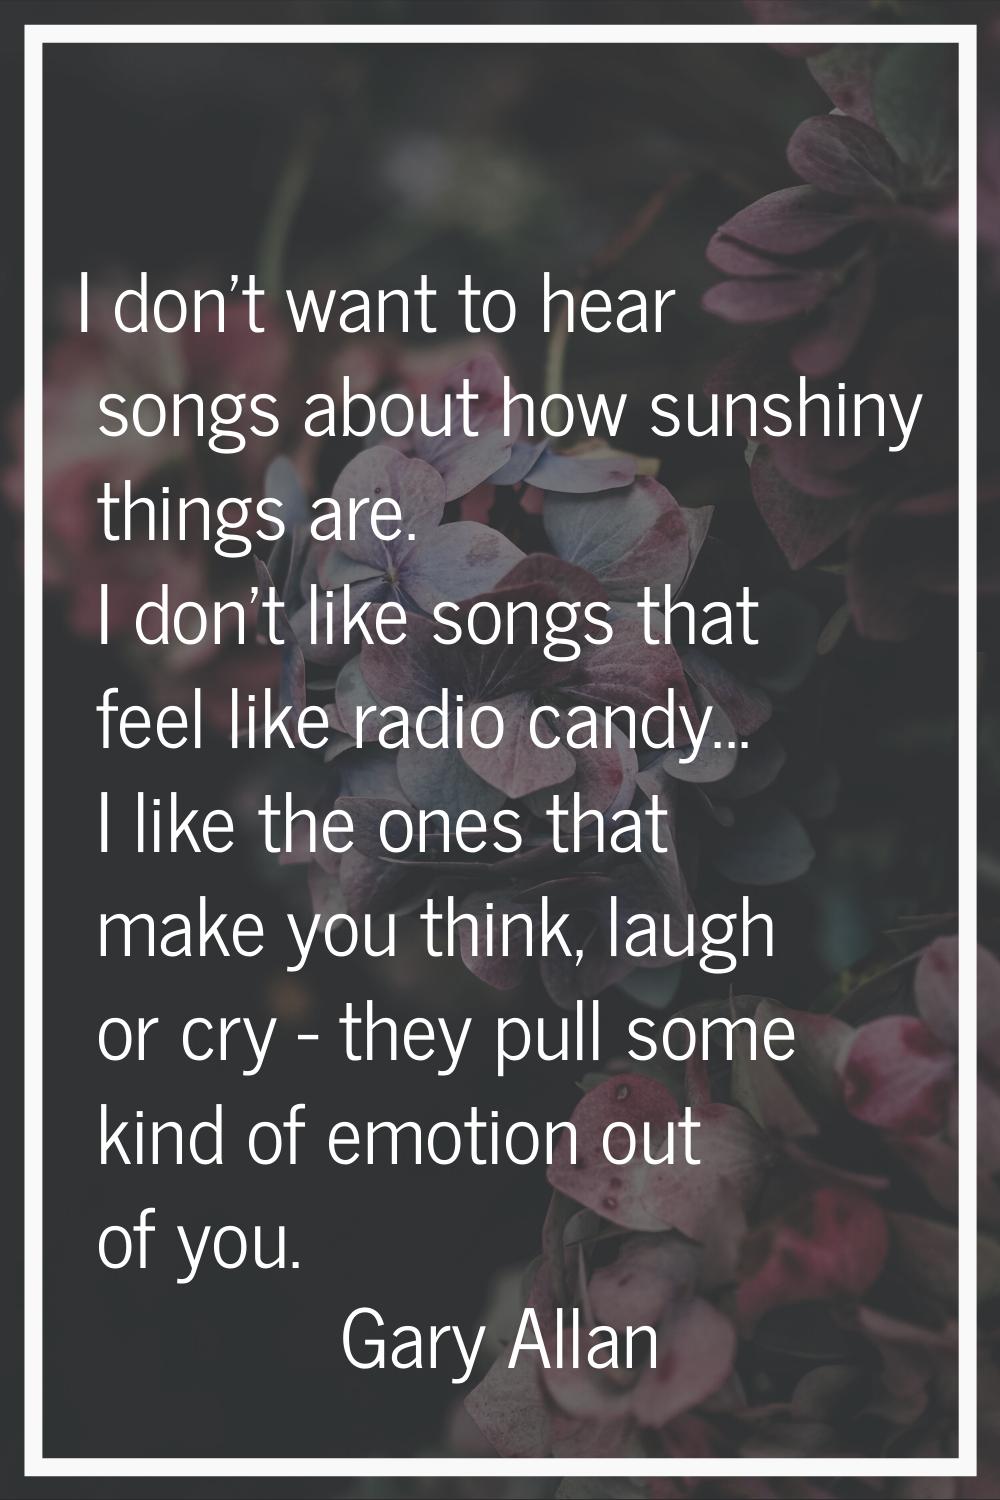 I don't want to hear songs about how sunshiny things are. I don't like songs that feel like radio c